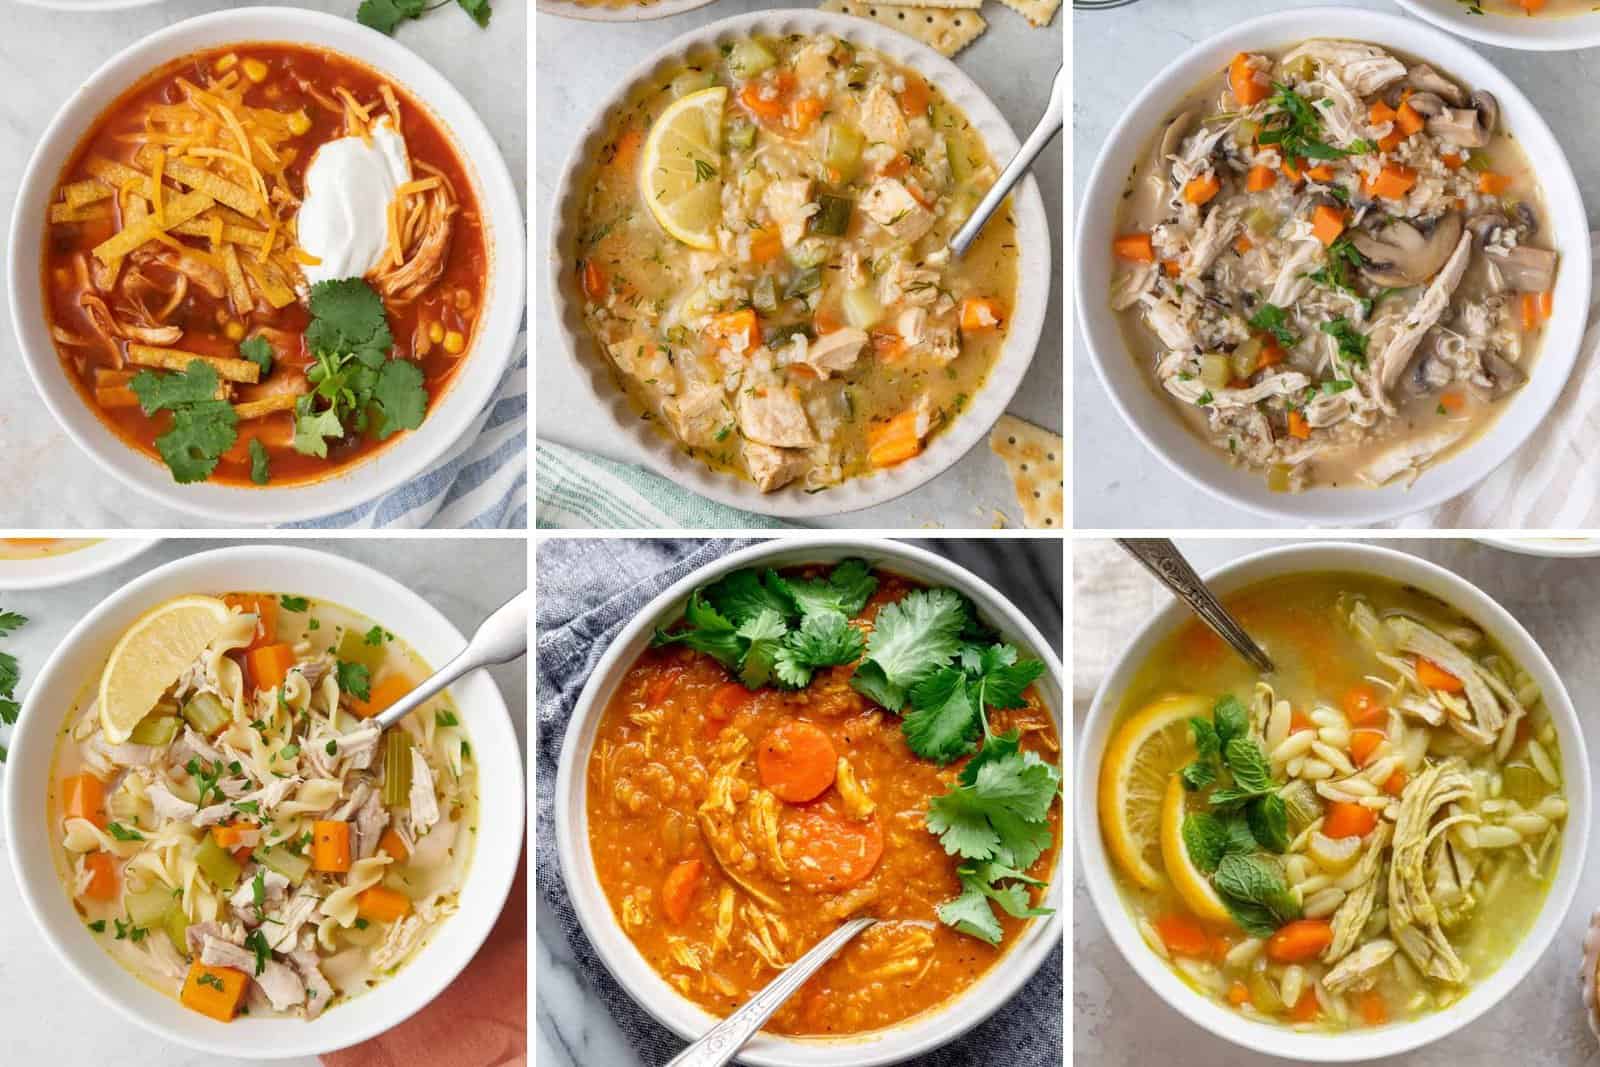 6 image collage featuring chicken soup recipes.